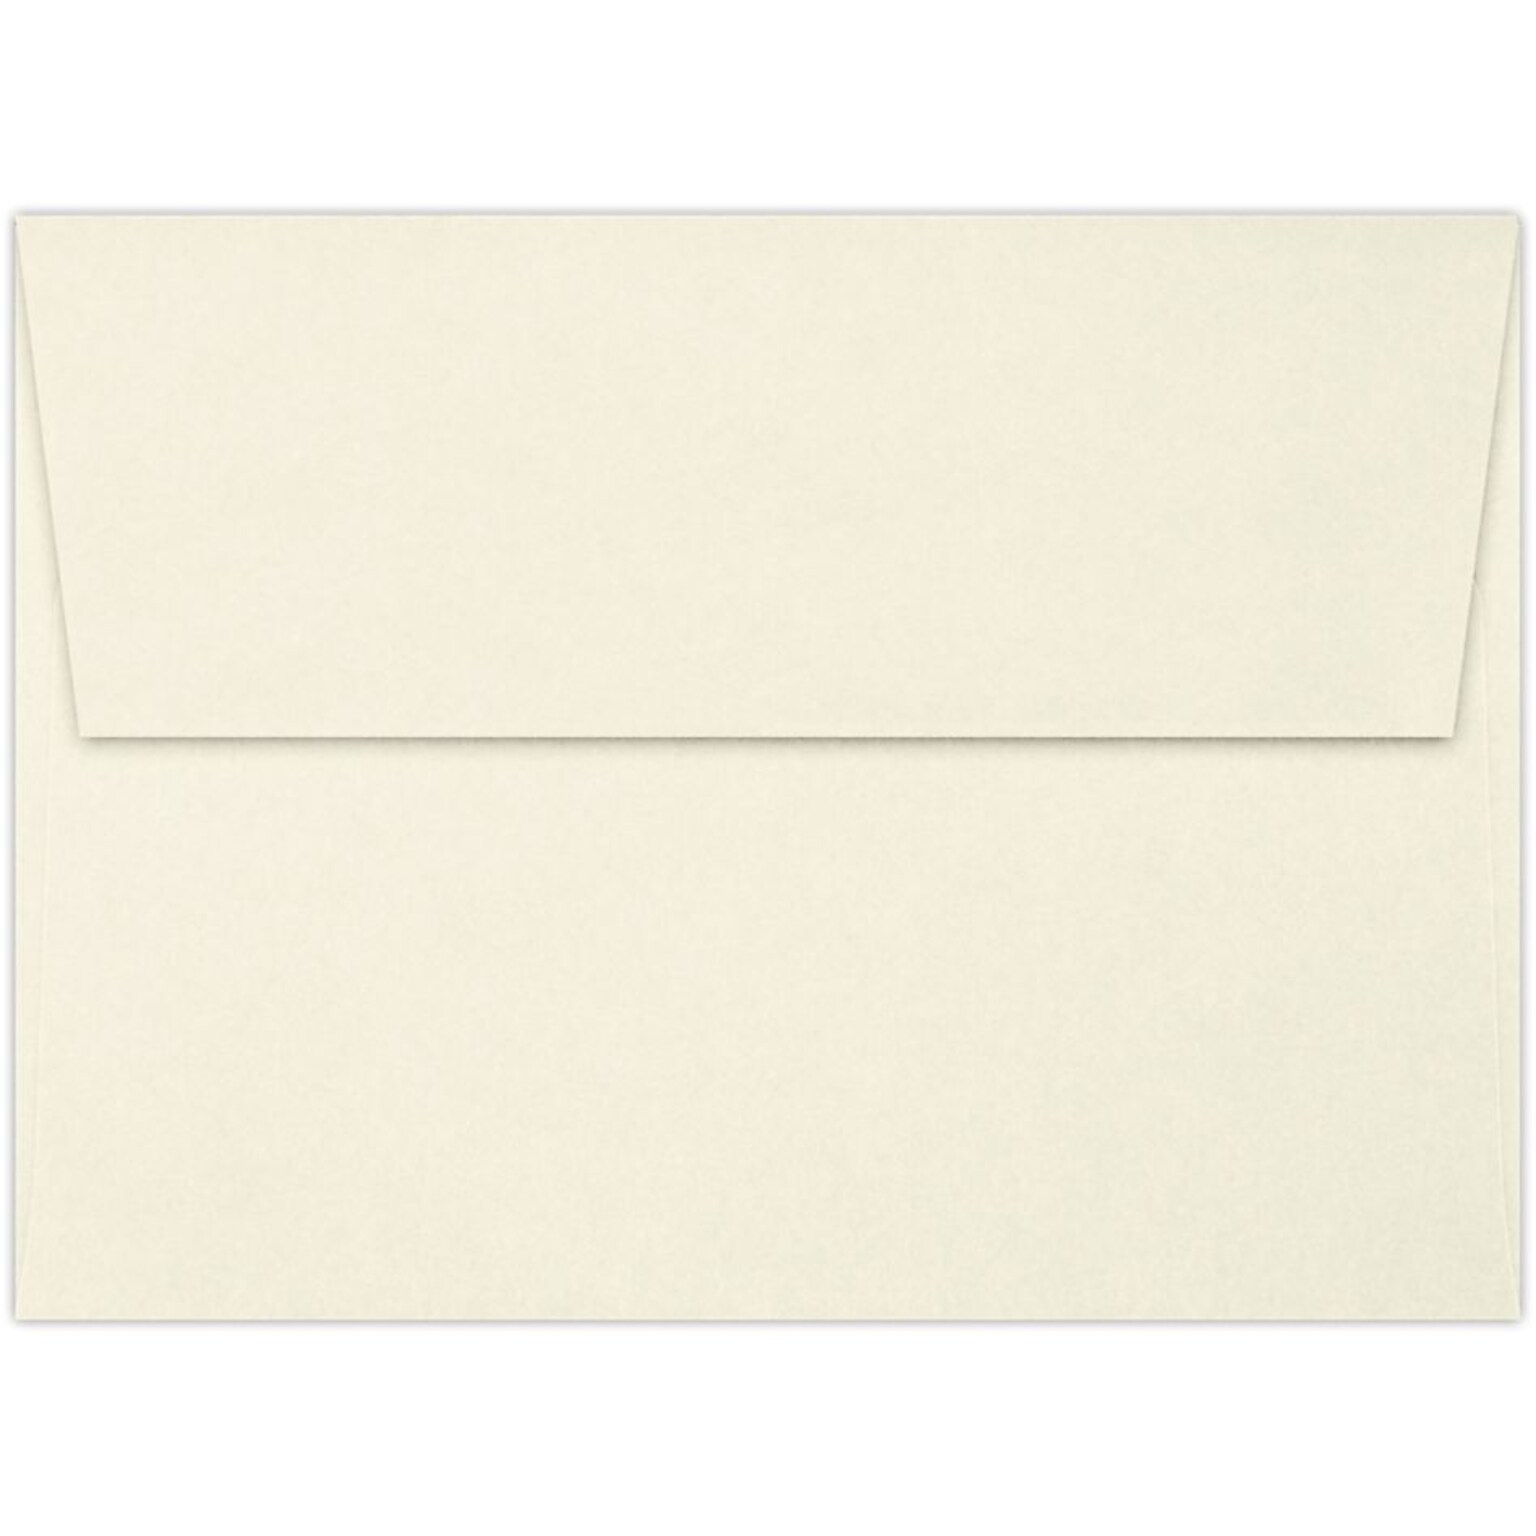 LUX A6 Invitation Envelopes (4 3/4 x 6 1/2) 1000/Pack, Classic Linen® Baronial Ivory (875-70BILI-1000)